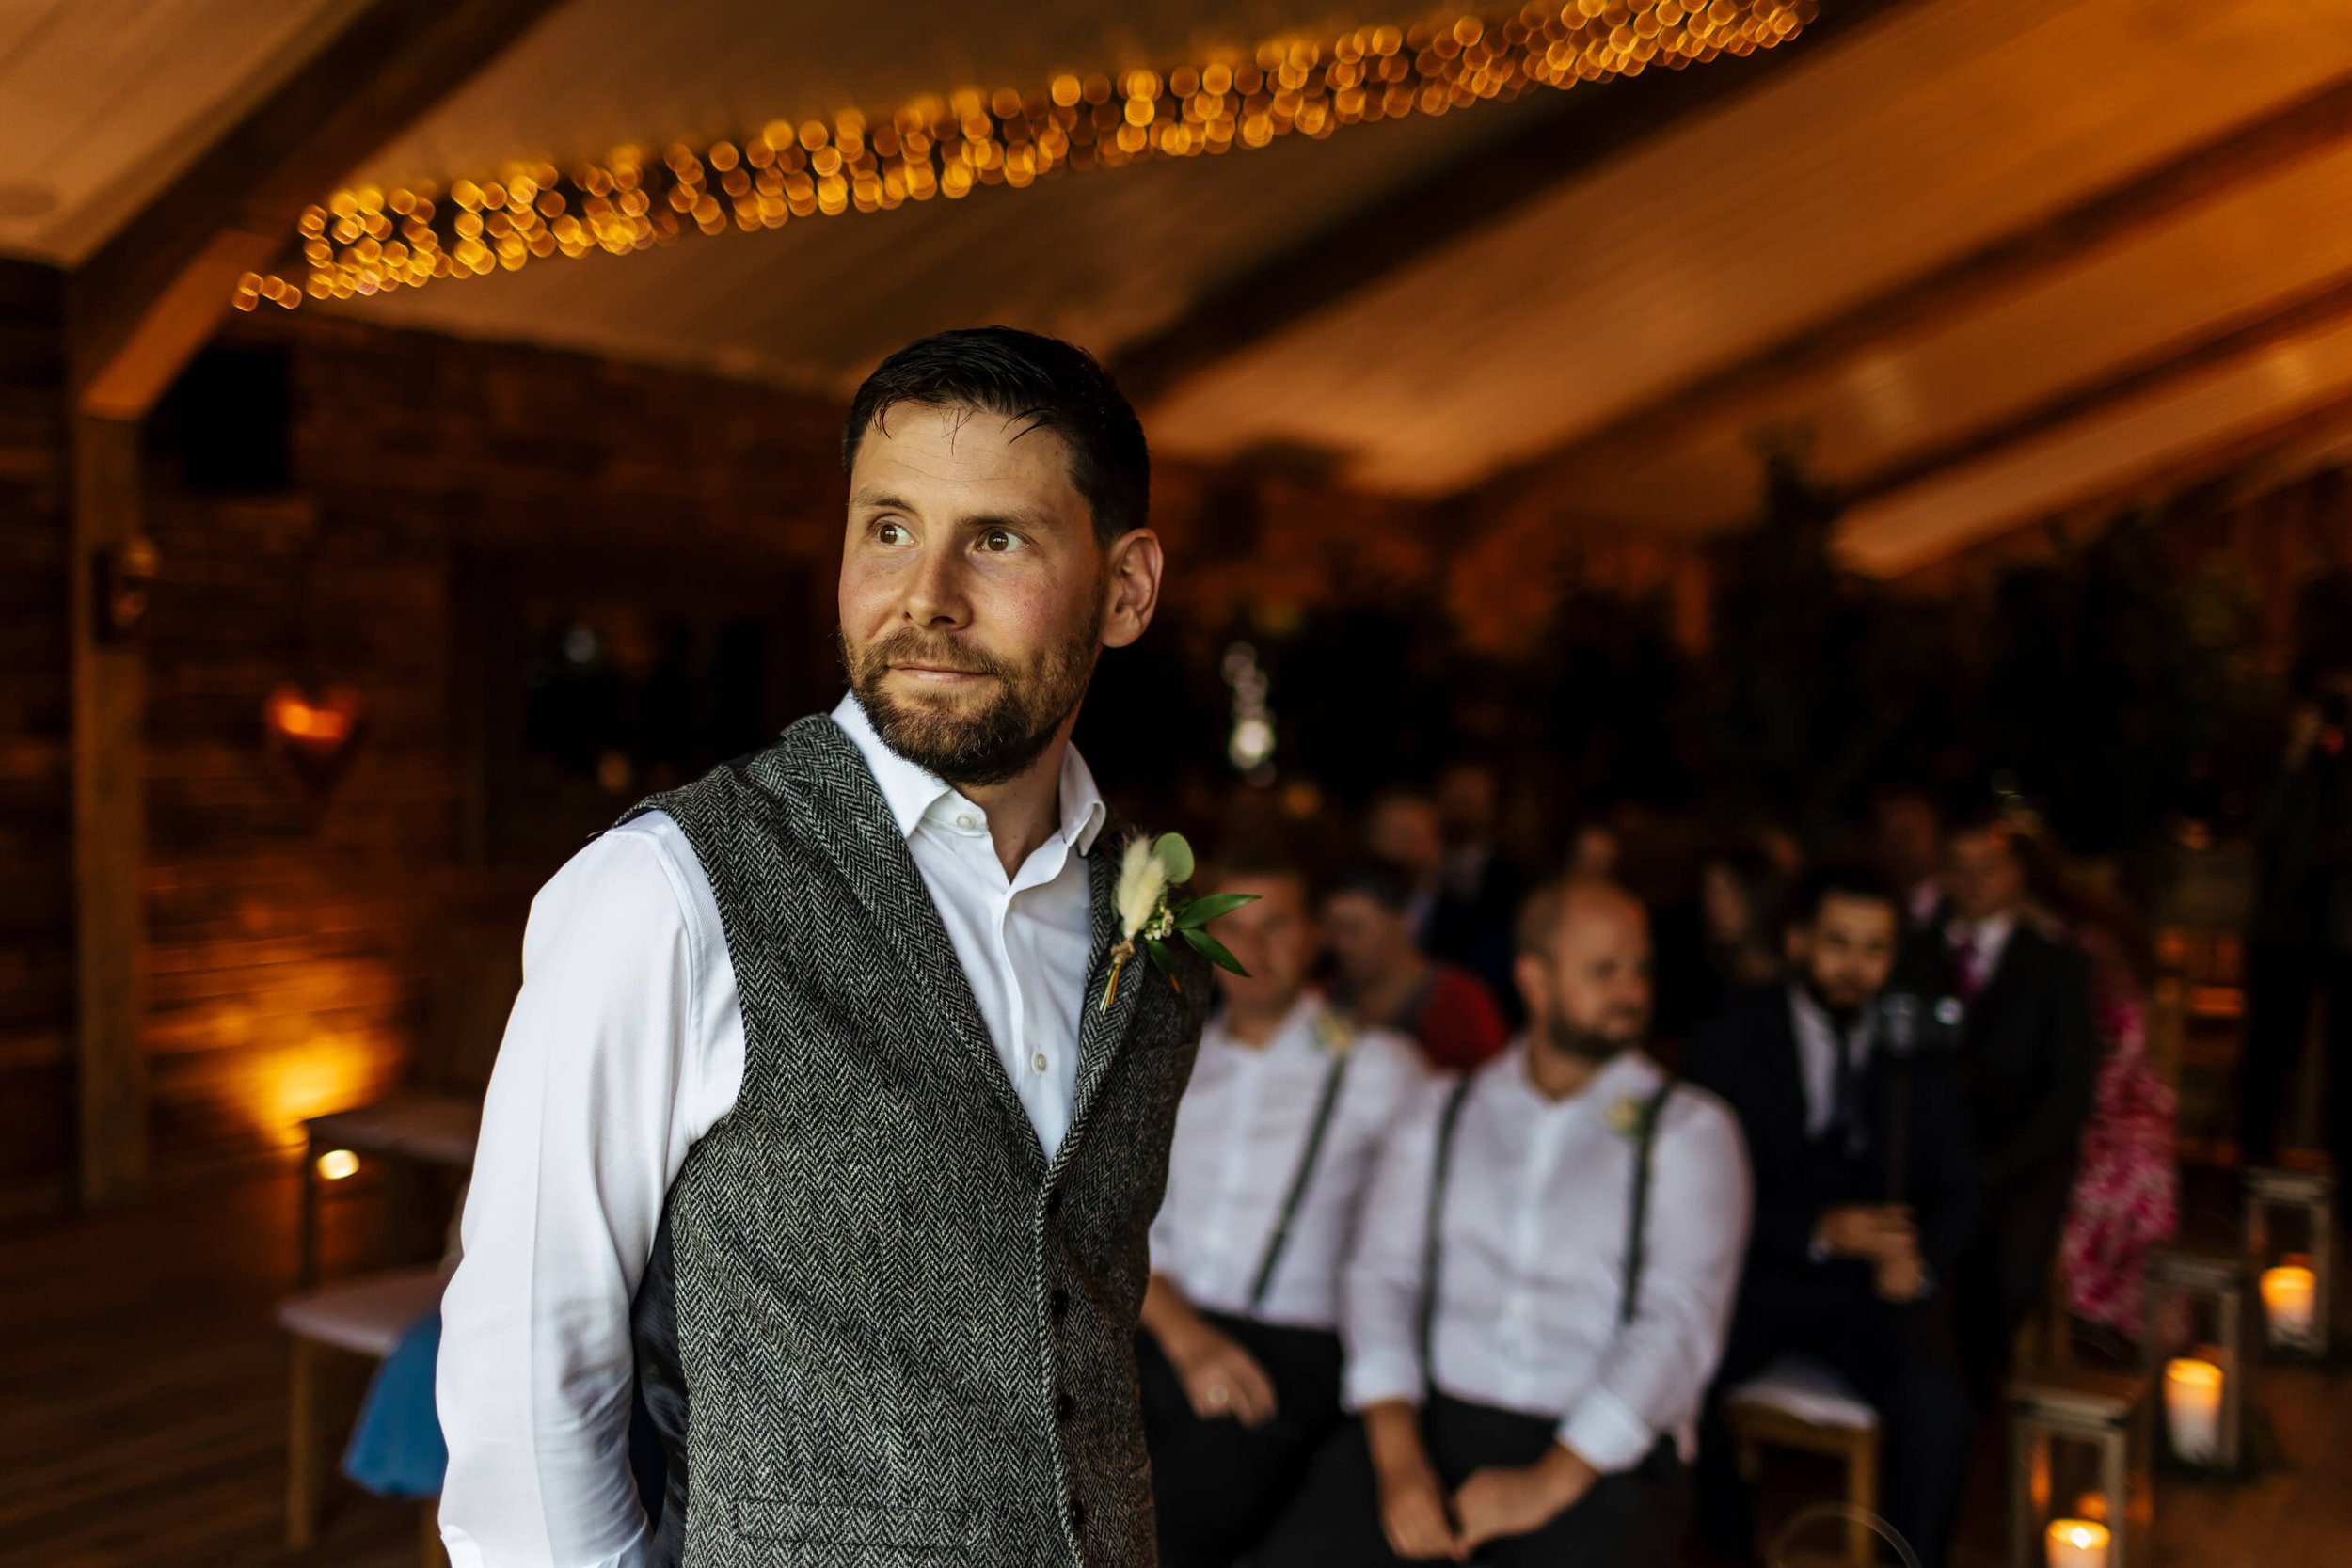 Groom awaiting his bride at the wedding ceremony